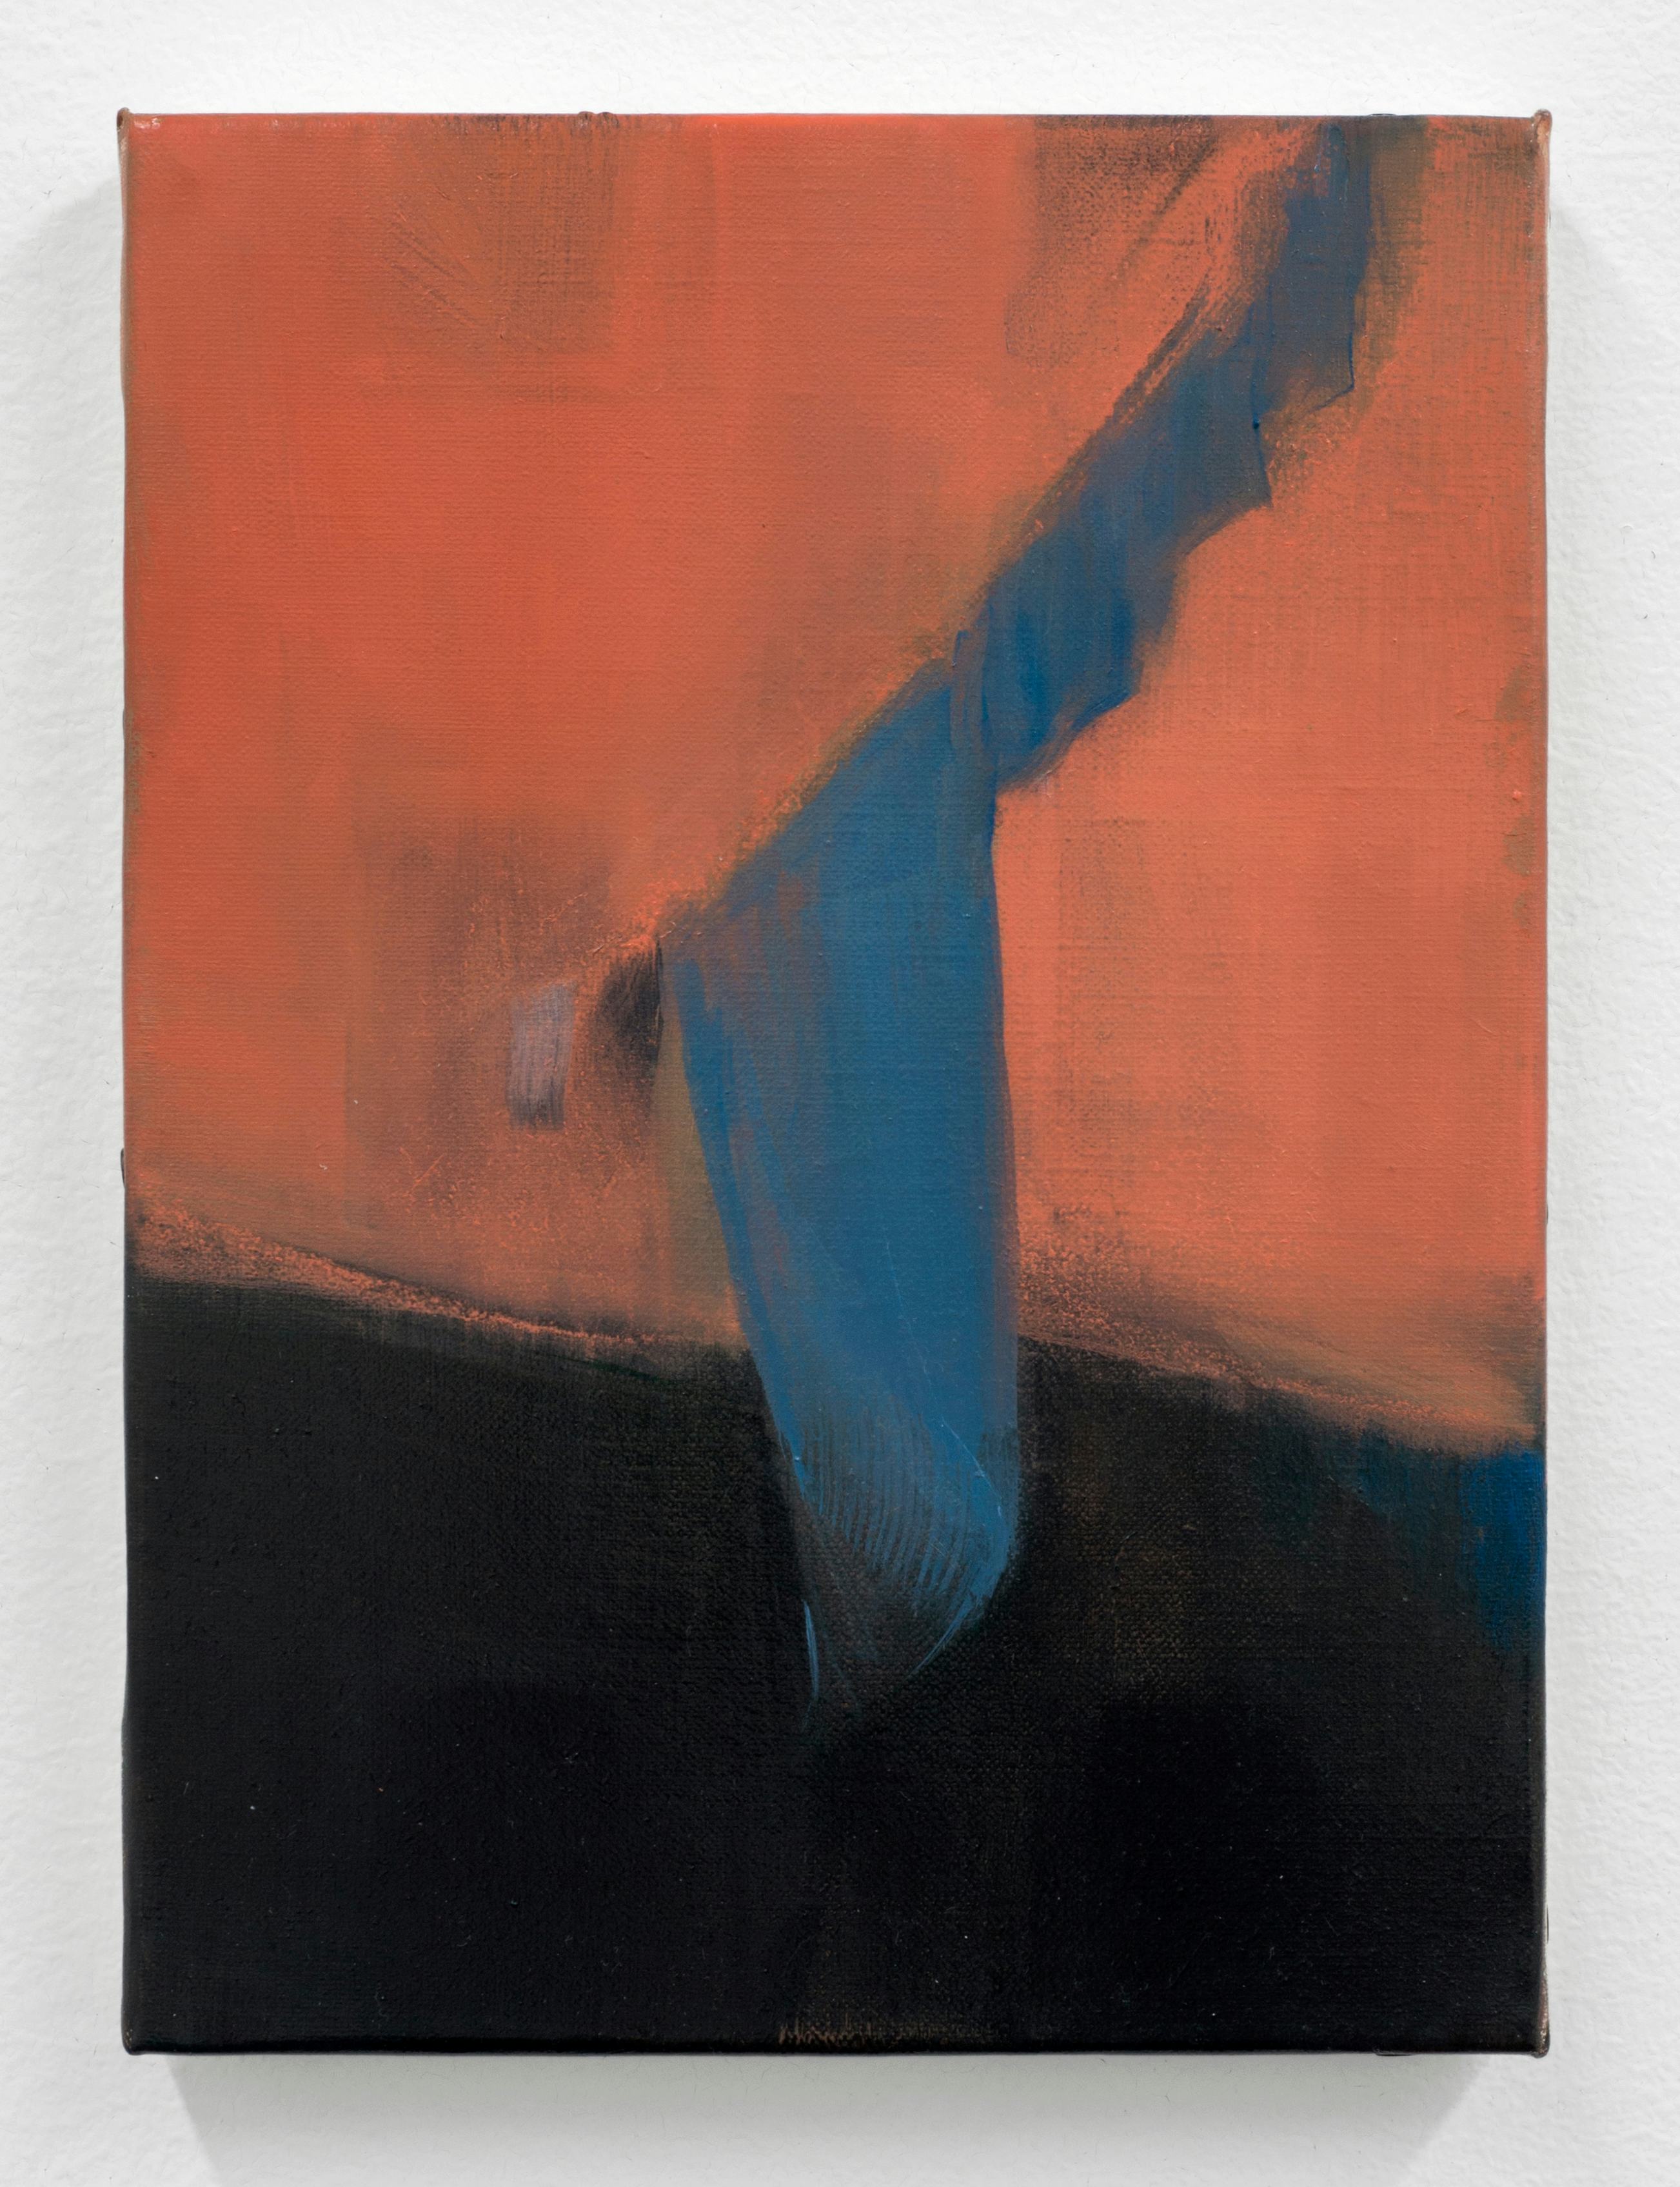 Untitled (2011)
Oil on linen. 

8.7 x 6.3 in (22 x 16 cm)